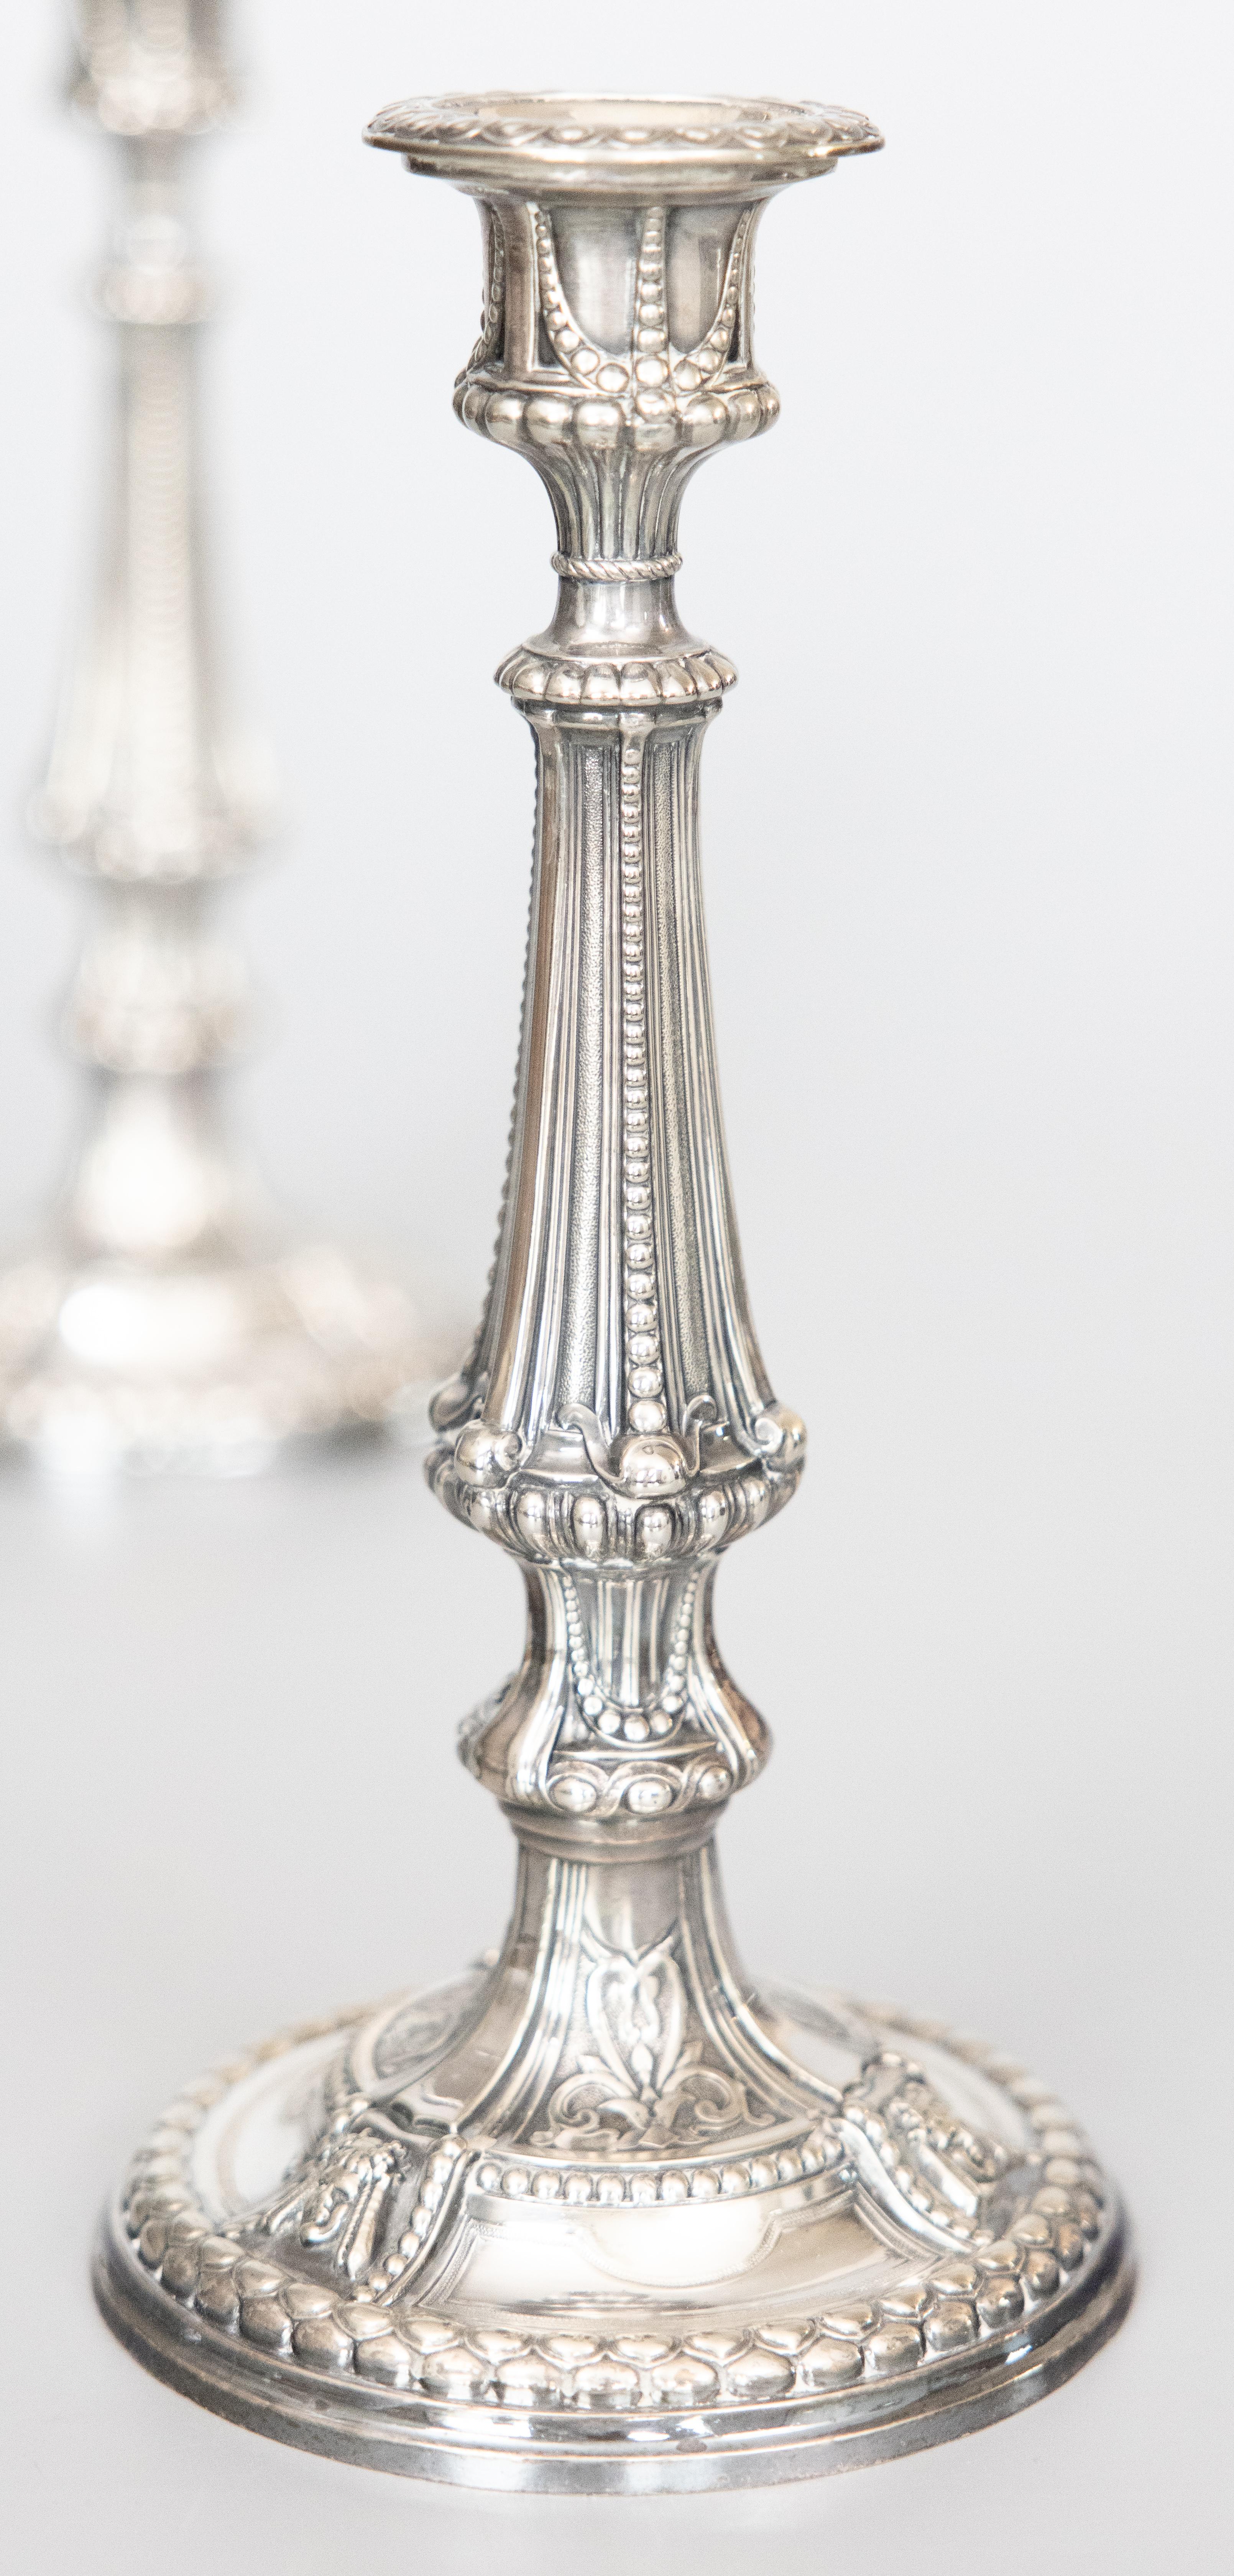 Pair of Antique Neoclassical Style English Silver Plate Candlesticks c. 1900 For Sale 1